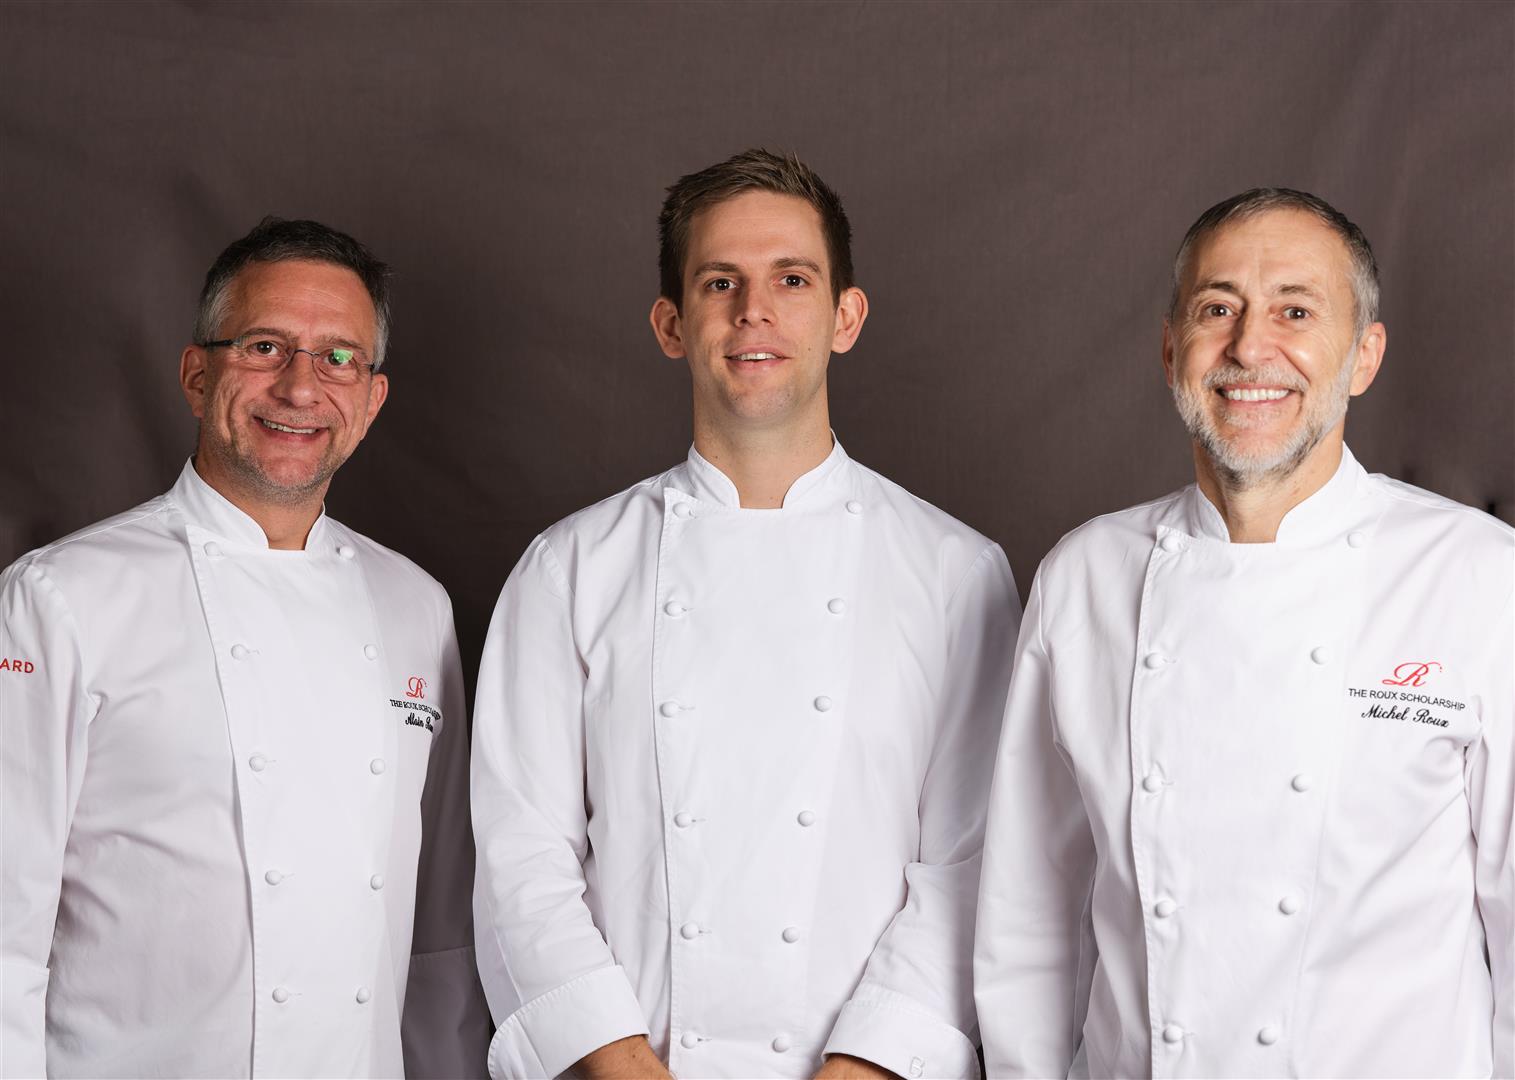 Oli Williamson wearing chef whites and posing with Alain Roux and Michel Roux Jr Large